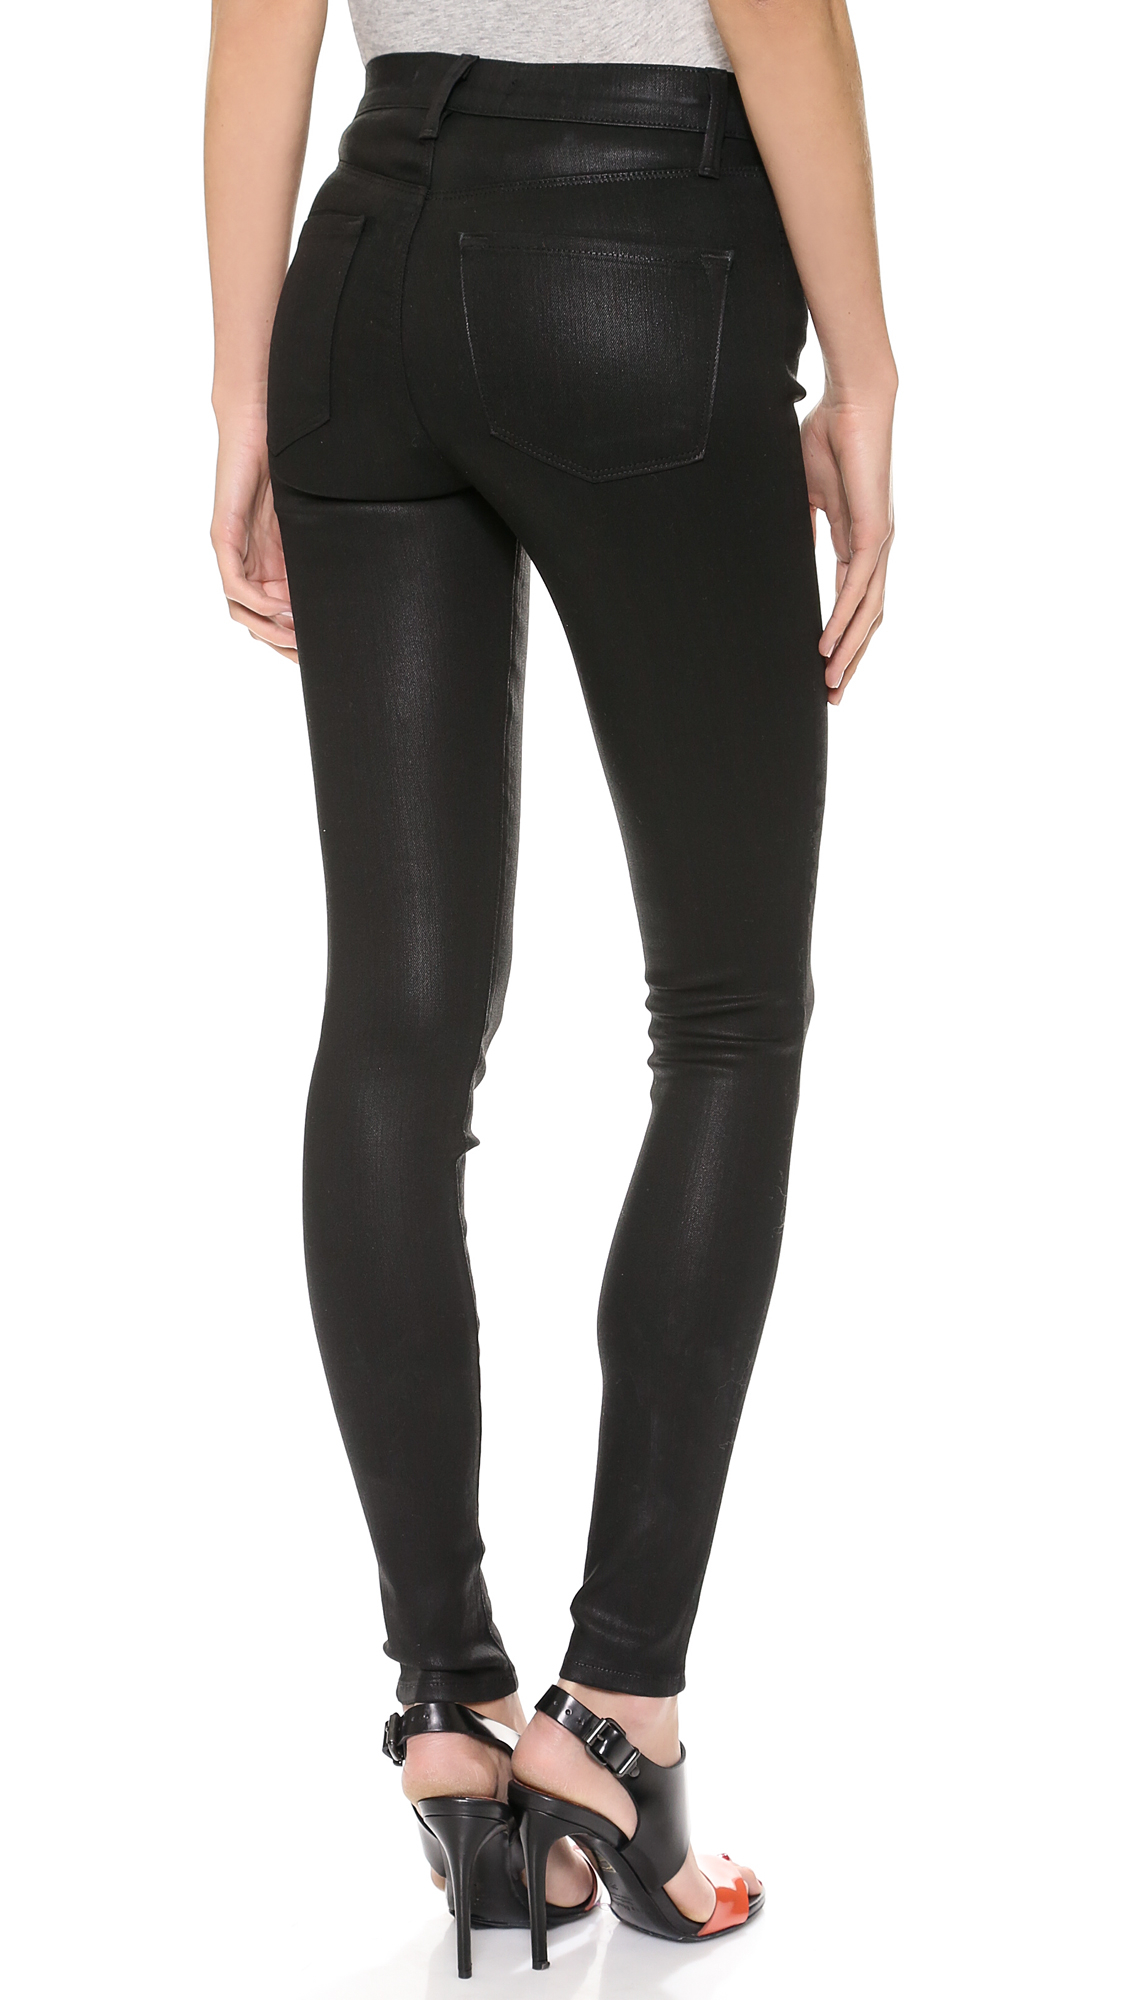 J Brand 23110 High Rise Coated Jeans - Fearless in Black | Lyst